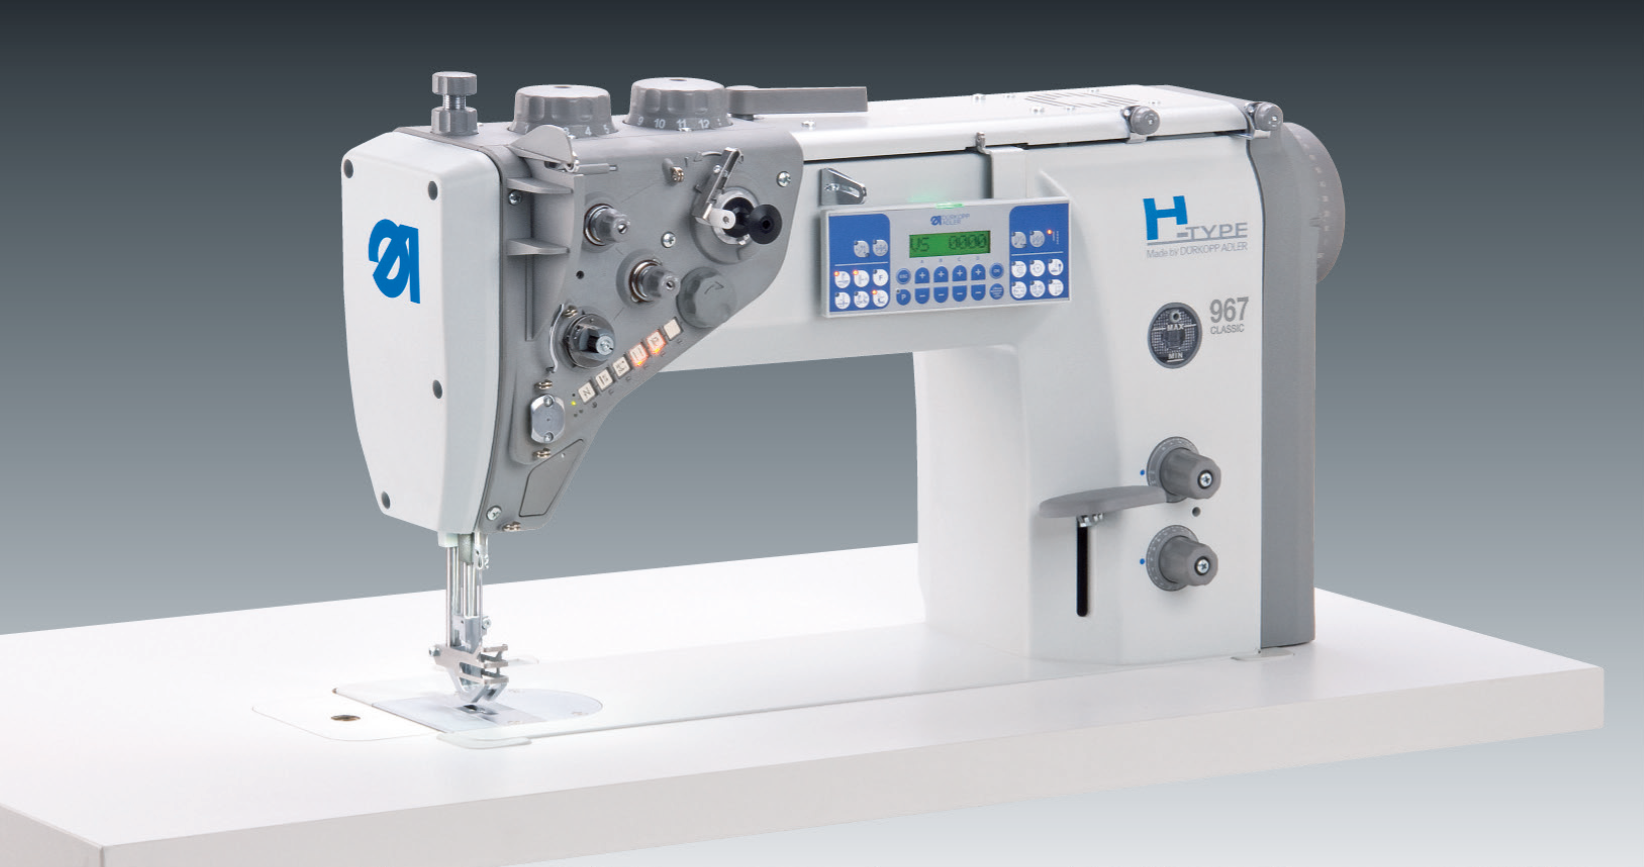 H-TYPE class 967 – CLASSIC version of the flat bed machine for extreme applications